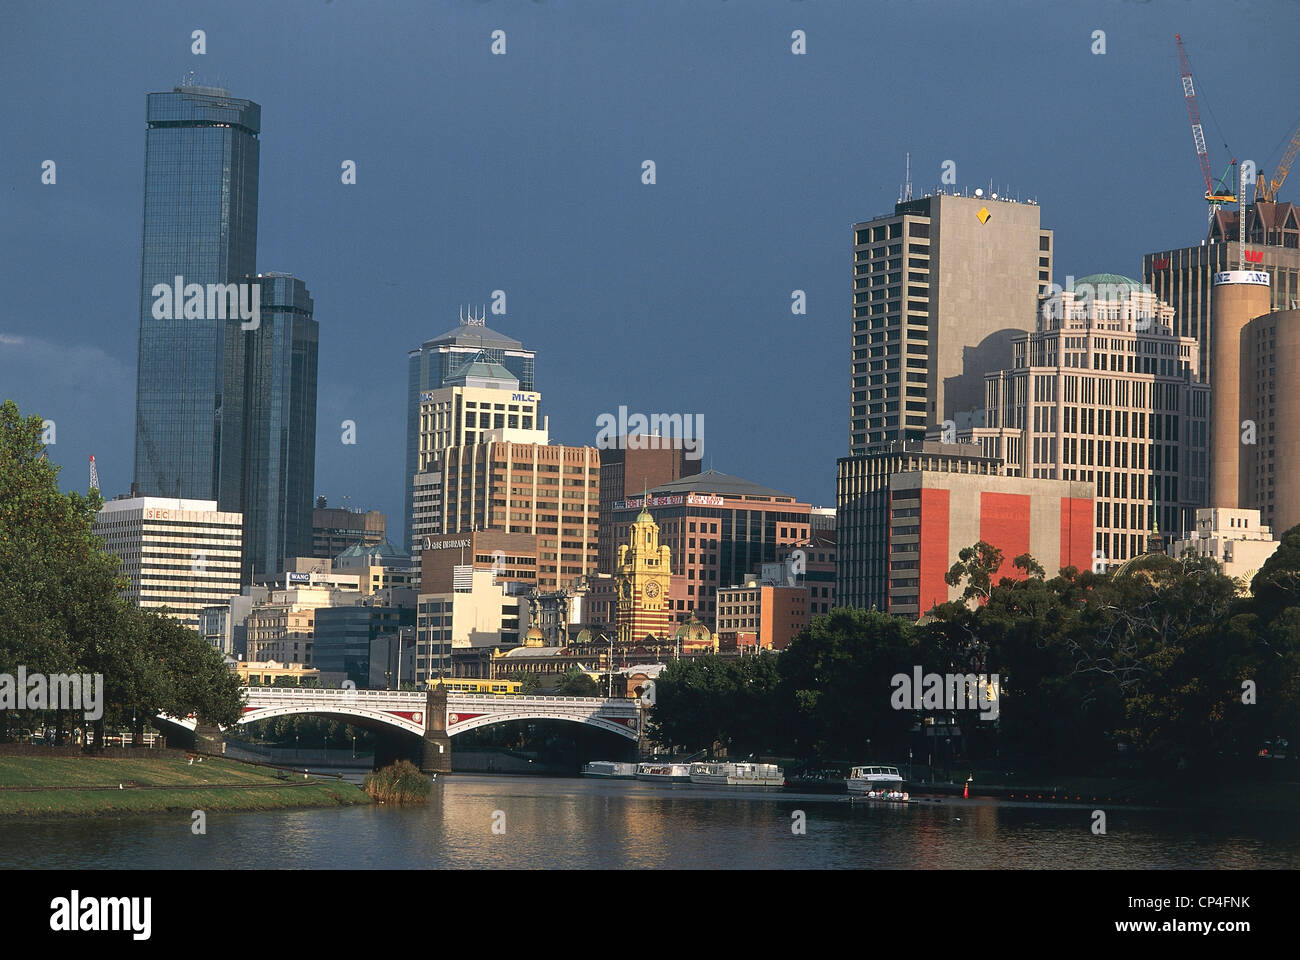 Australia - Victoria - Melbourne, the center of the city and the Yarra River. Stock Photo